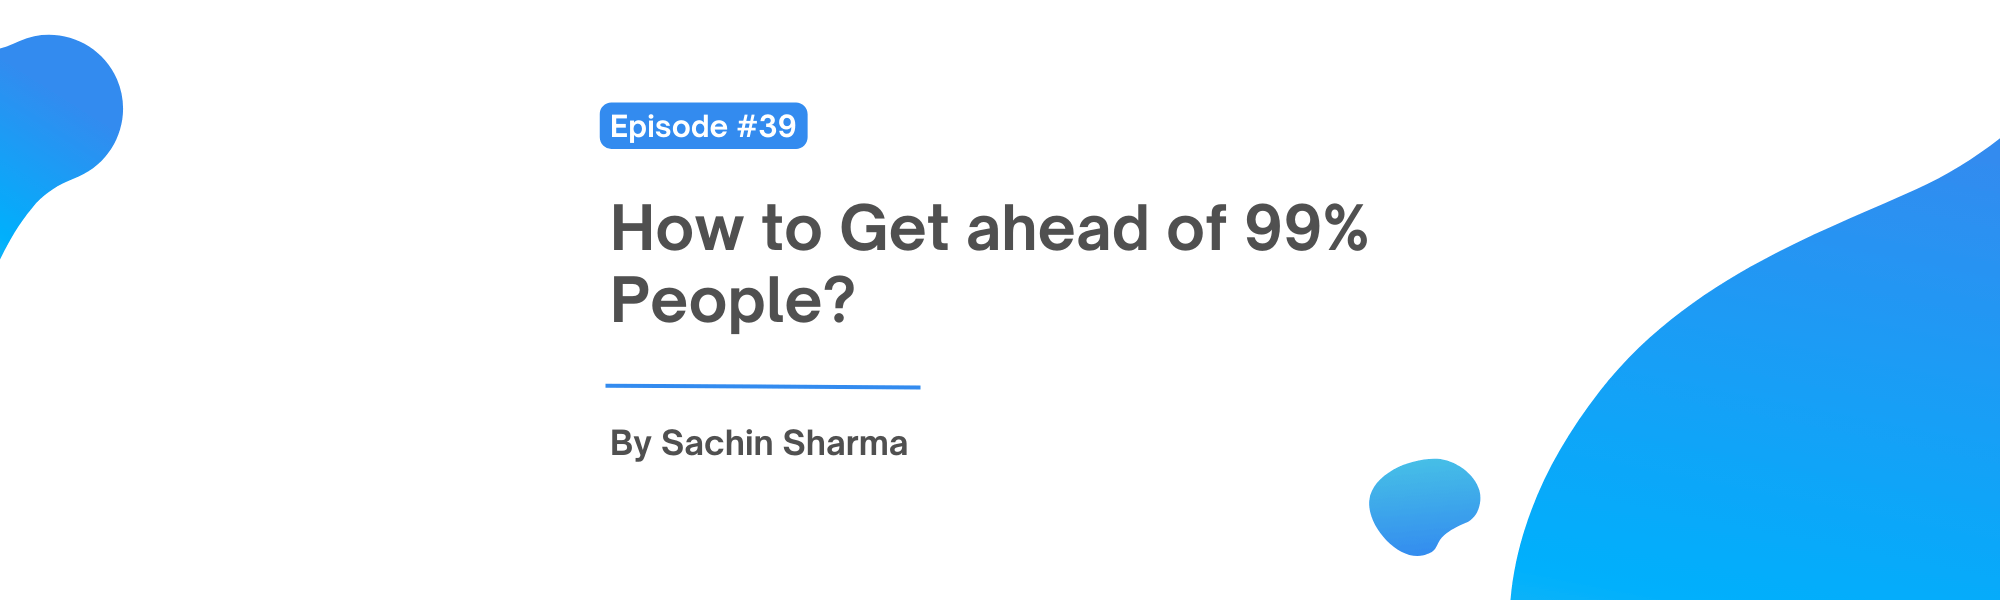 How to Get ahead of 99% People?